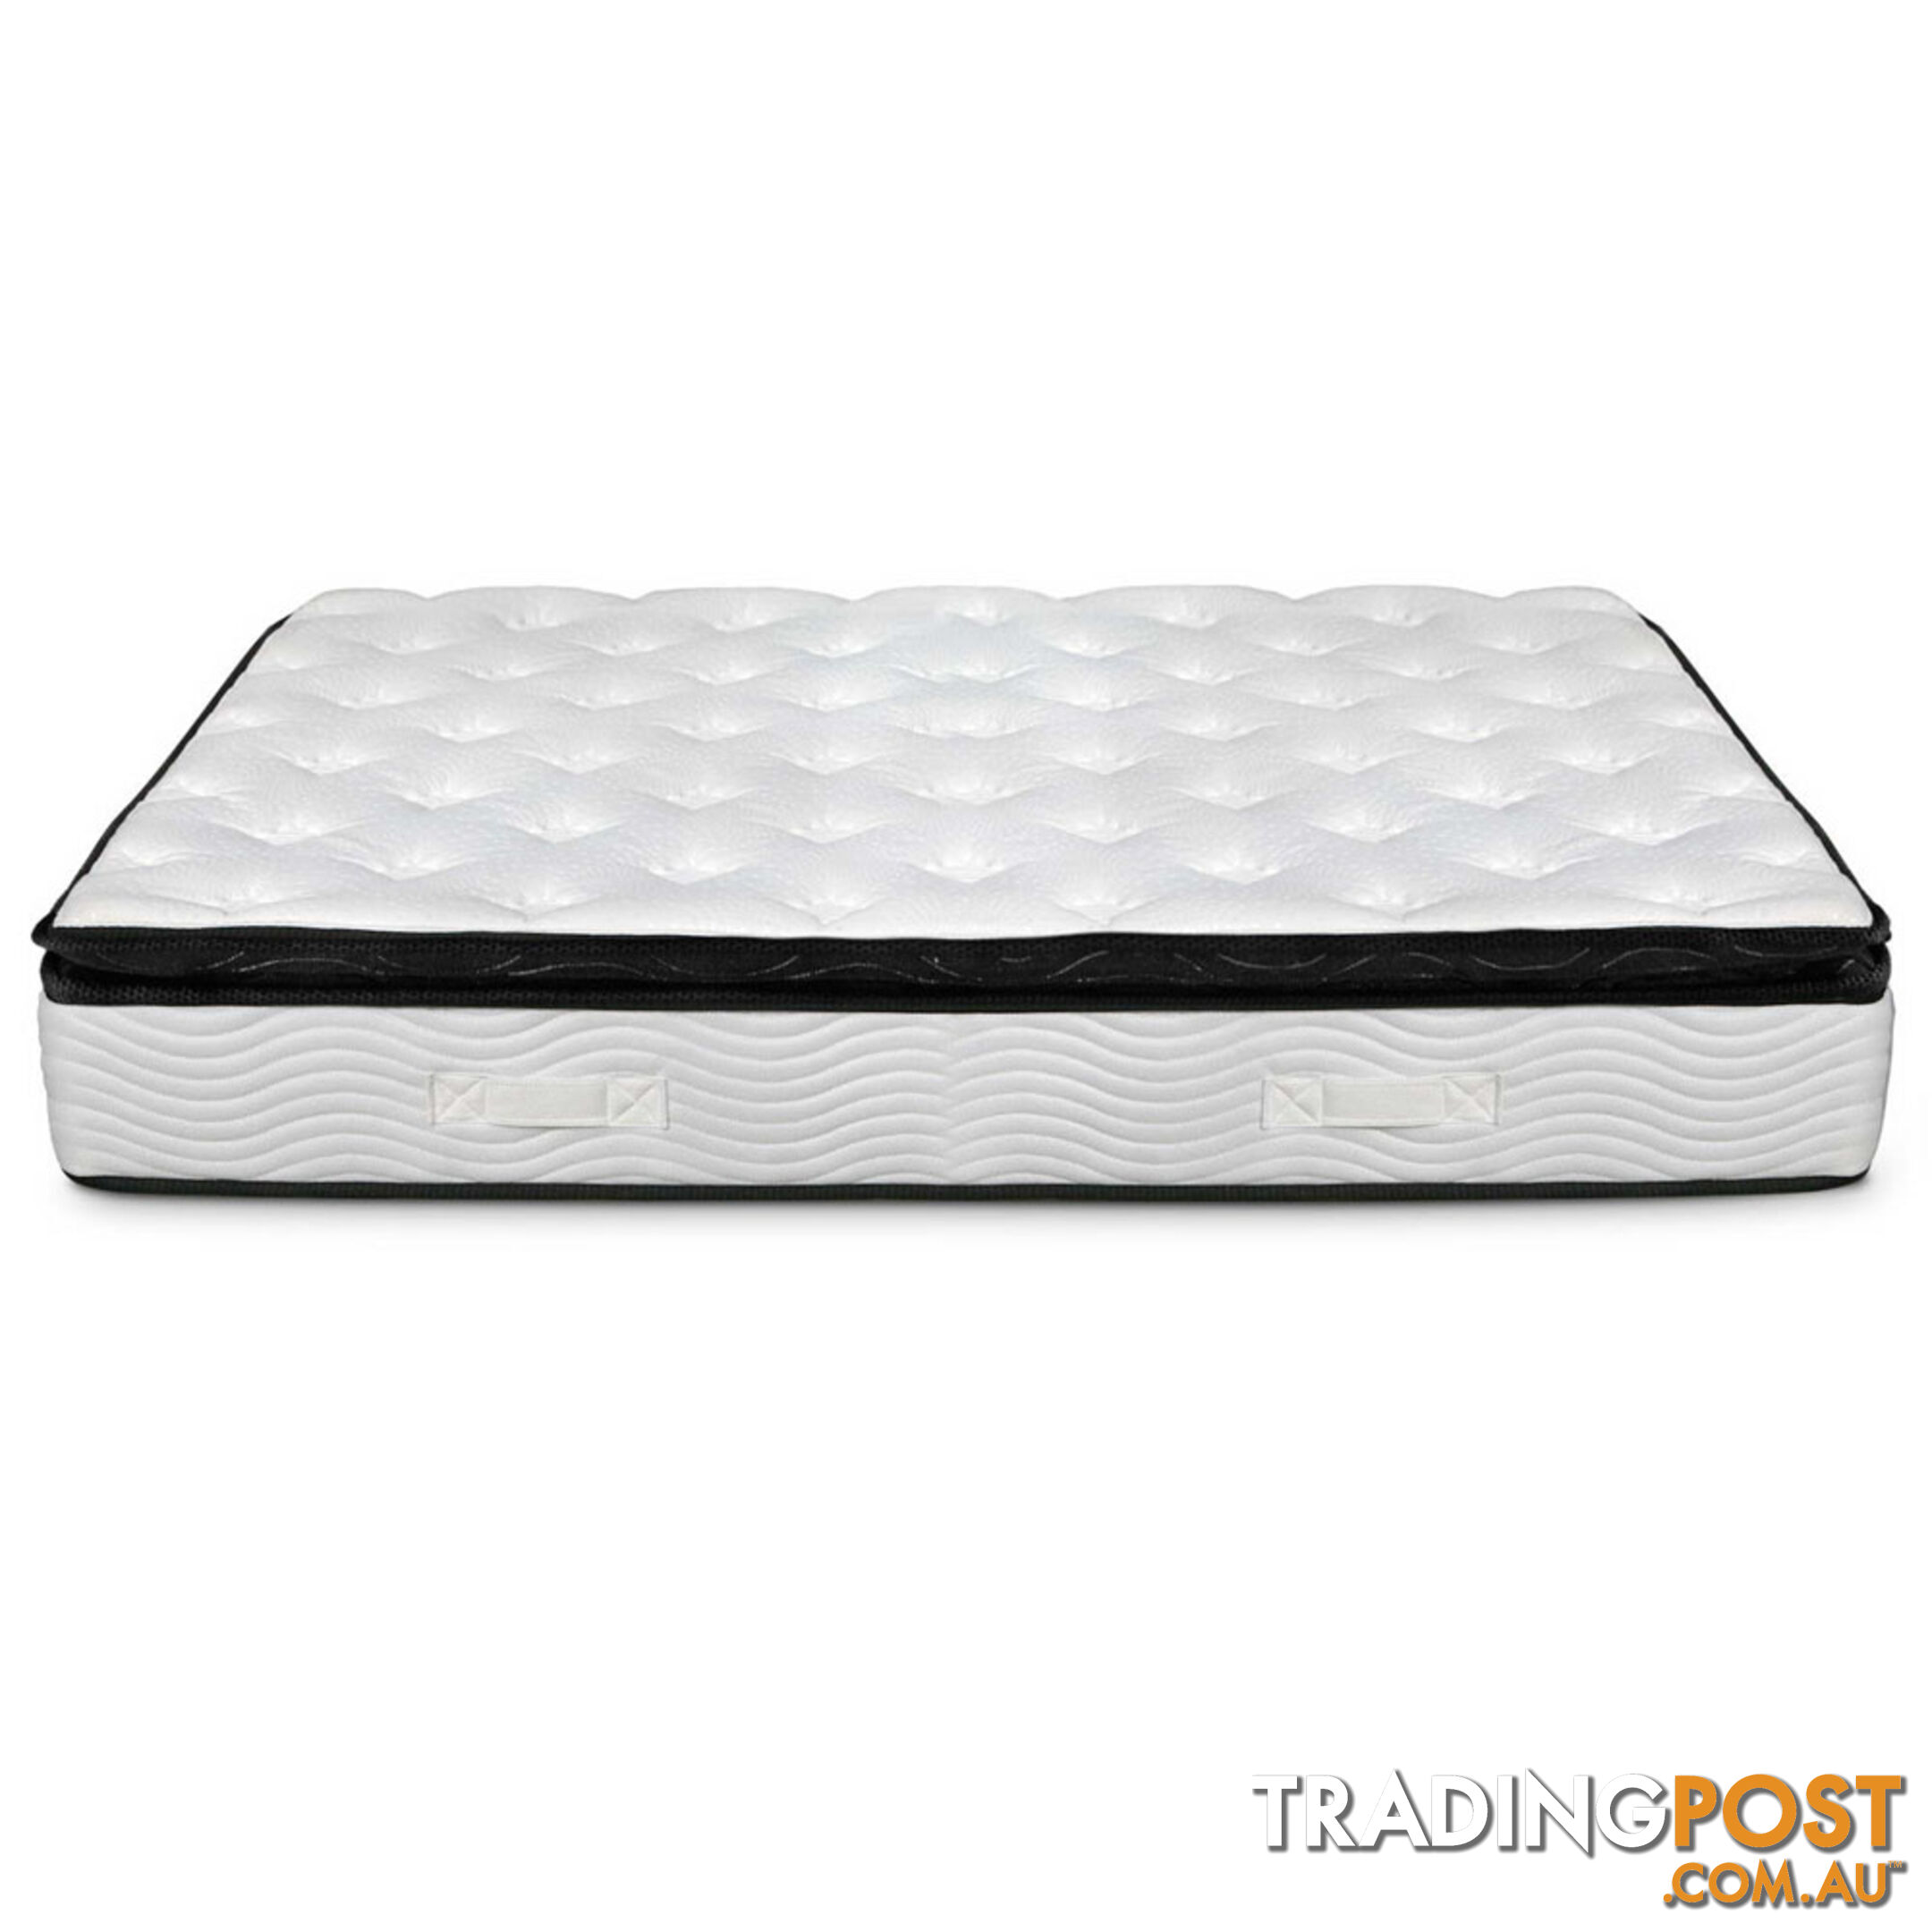 Luxury Mattress 28cm Natural Latex Pillow Top 5 Zone Pocket Spring Bed King